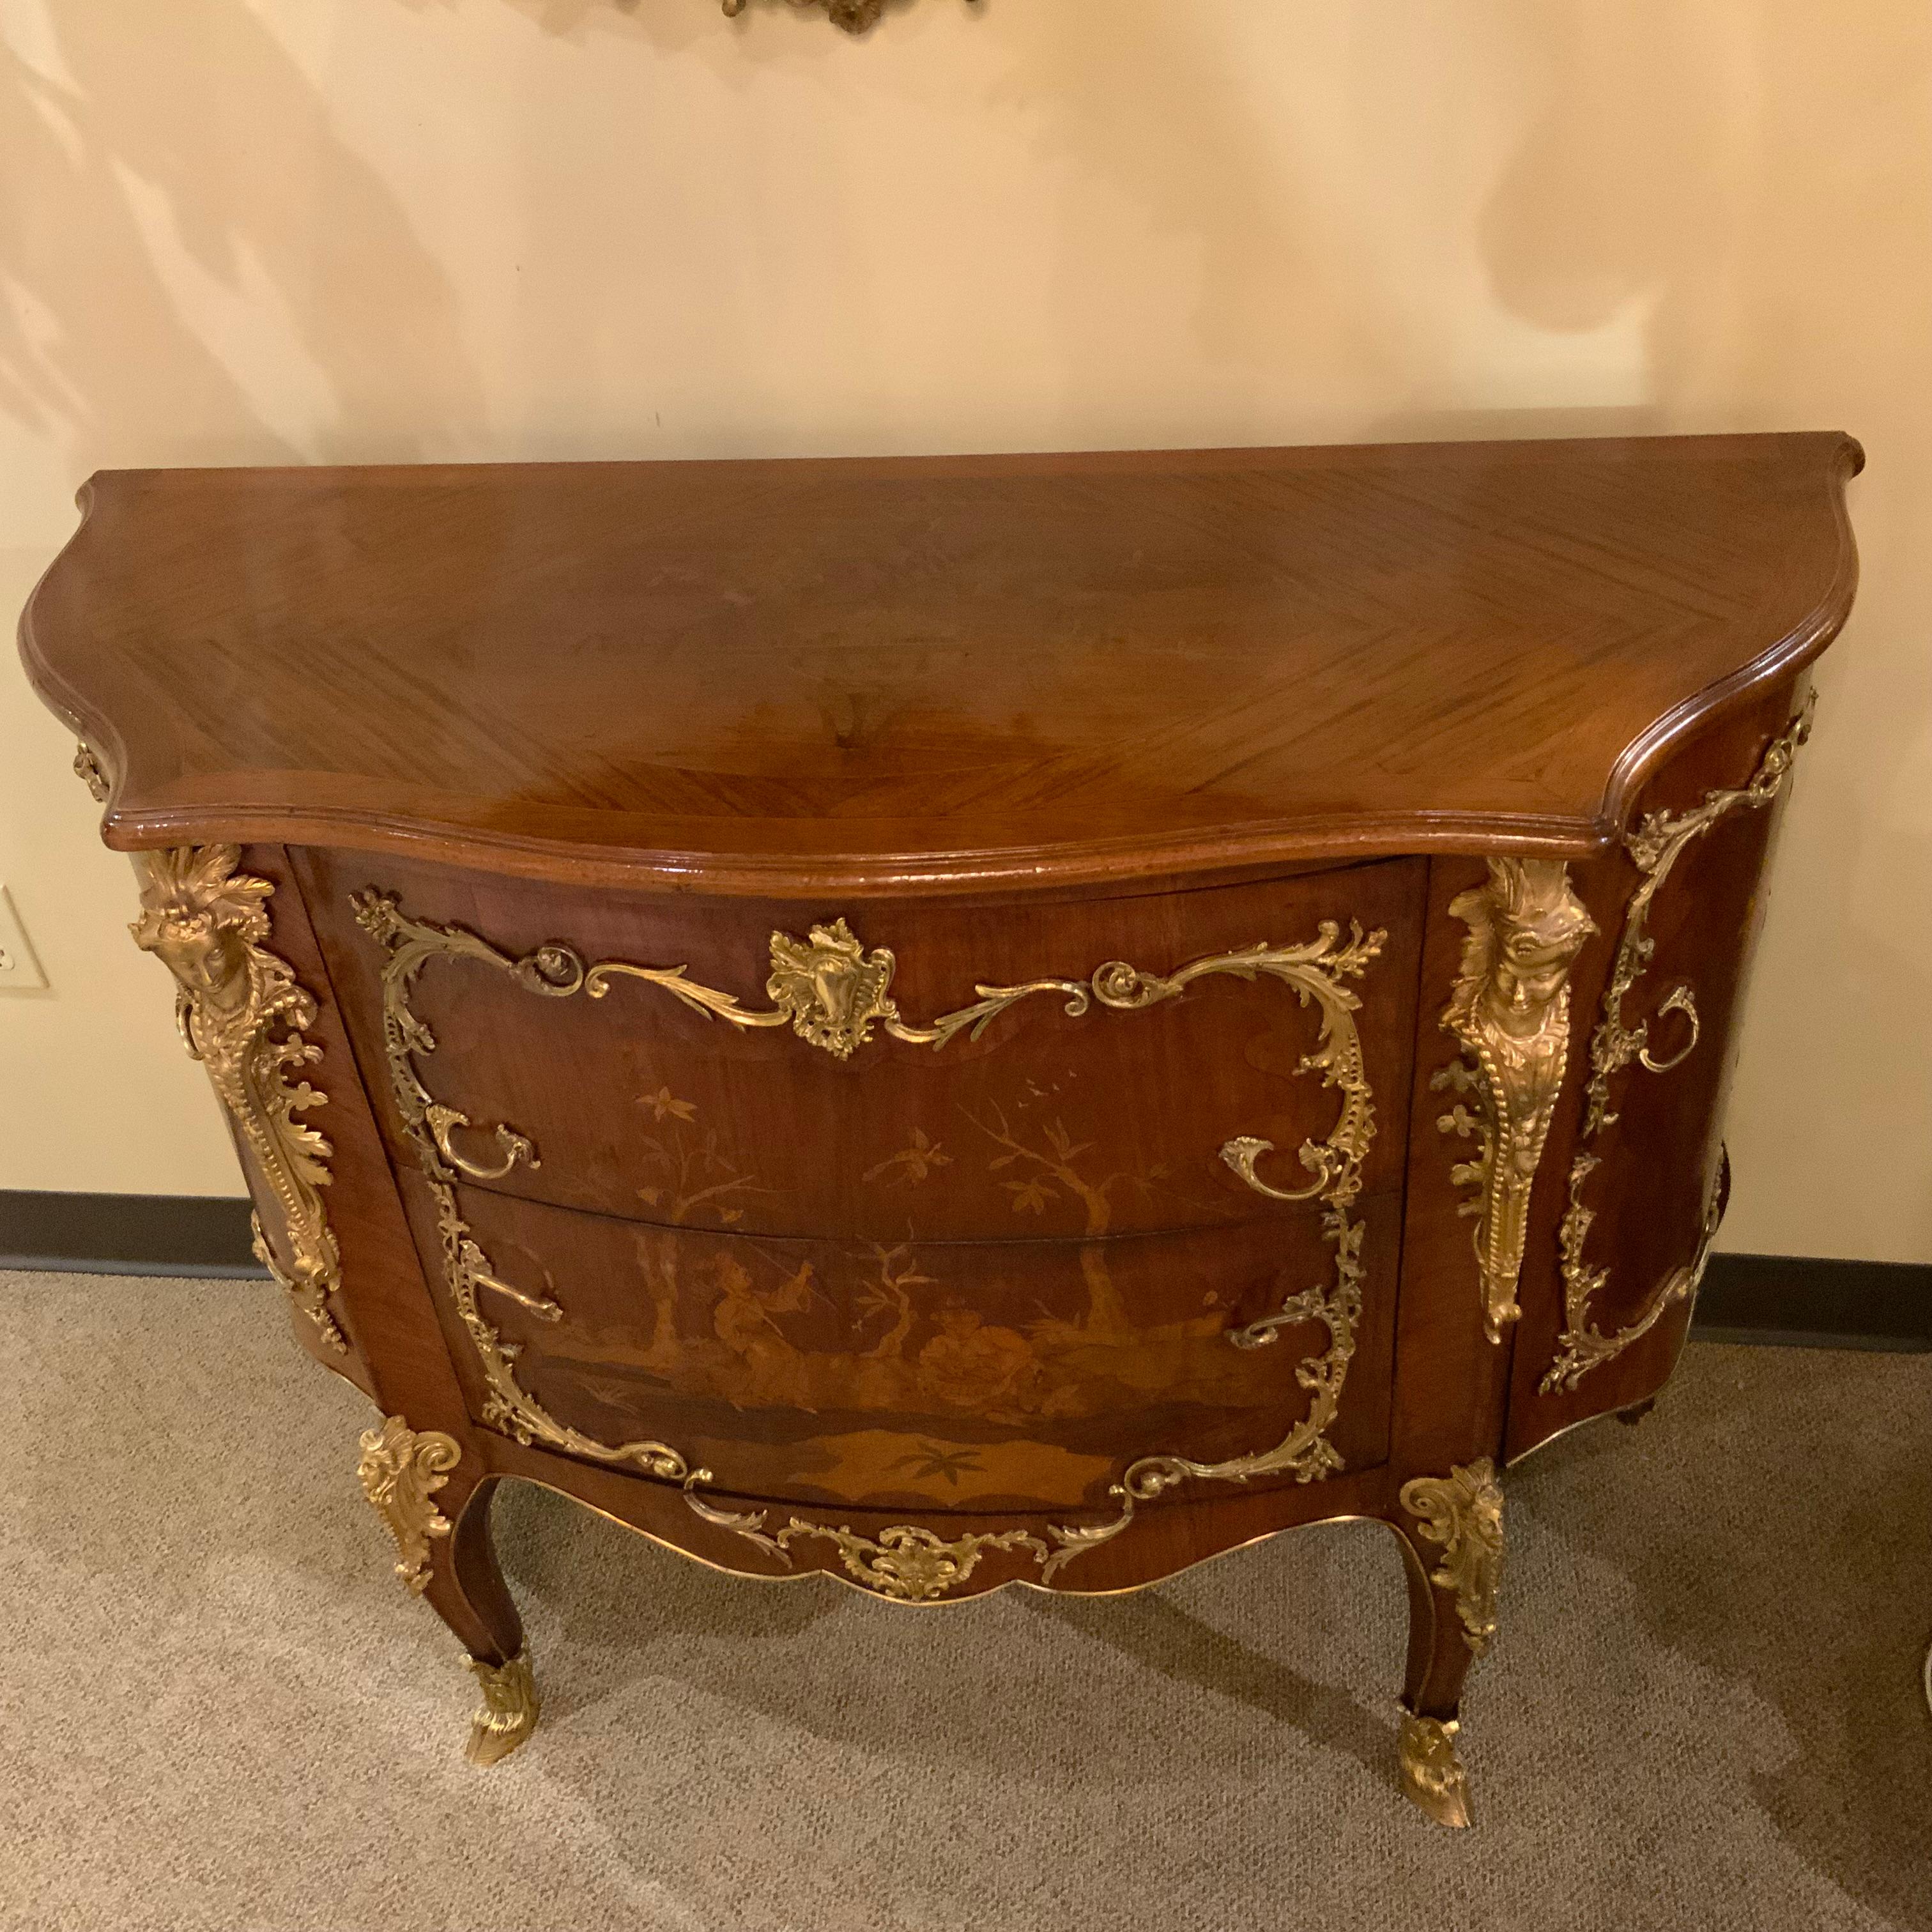 This pair of French commodes exhibit exceptional marquetry inlay
of the finest woods portraying a chinoiserie scene. It is late
19th century, each having a shaped and bowed top that is also
Inlaid with a floral and foliate oval motif above a